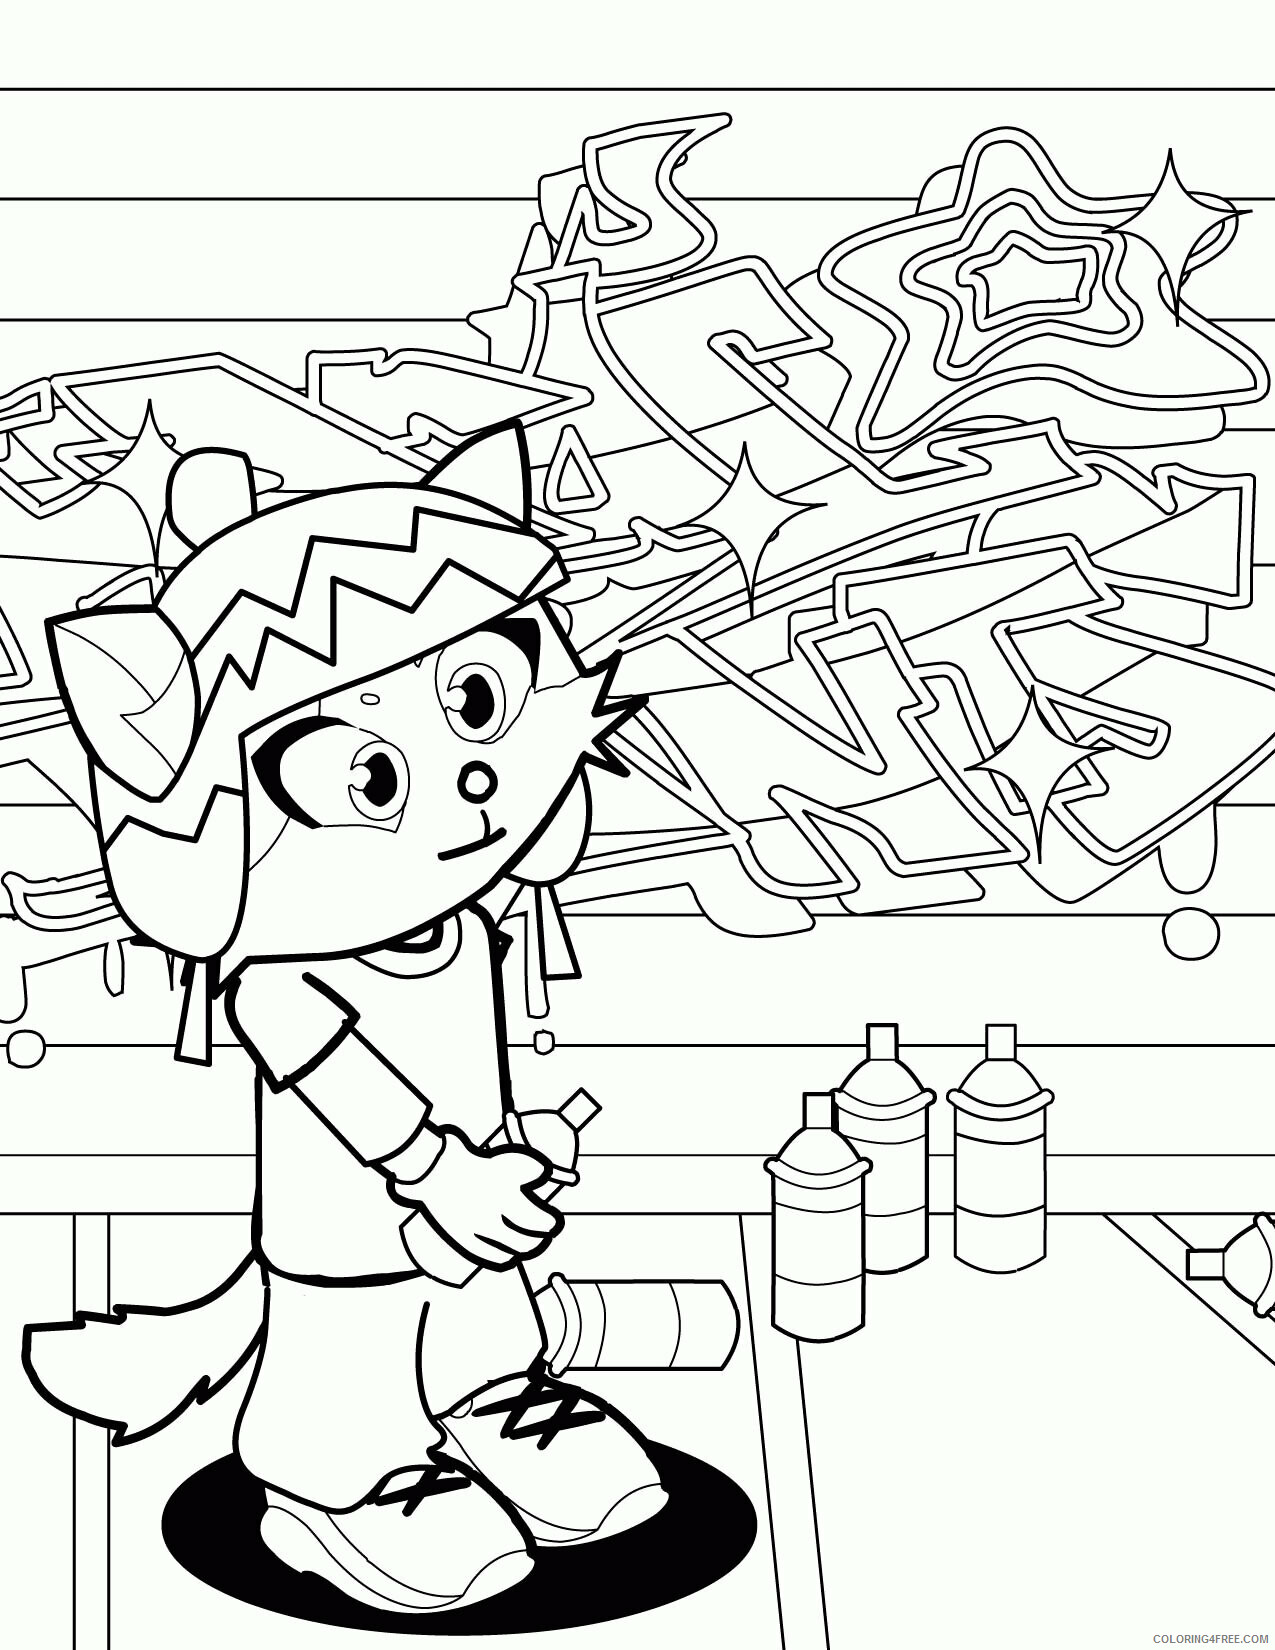 Artist Coloring Page Printable Sheets Graffiti Artist Page Handipoints 2021 a 3289 Coloring4free